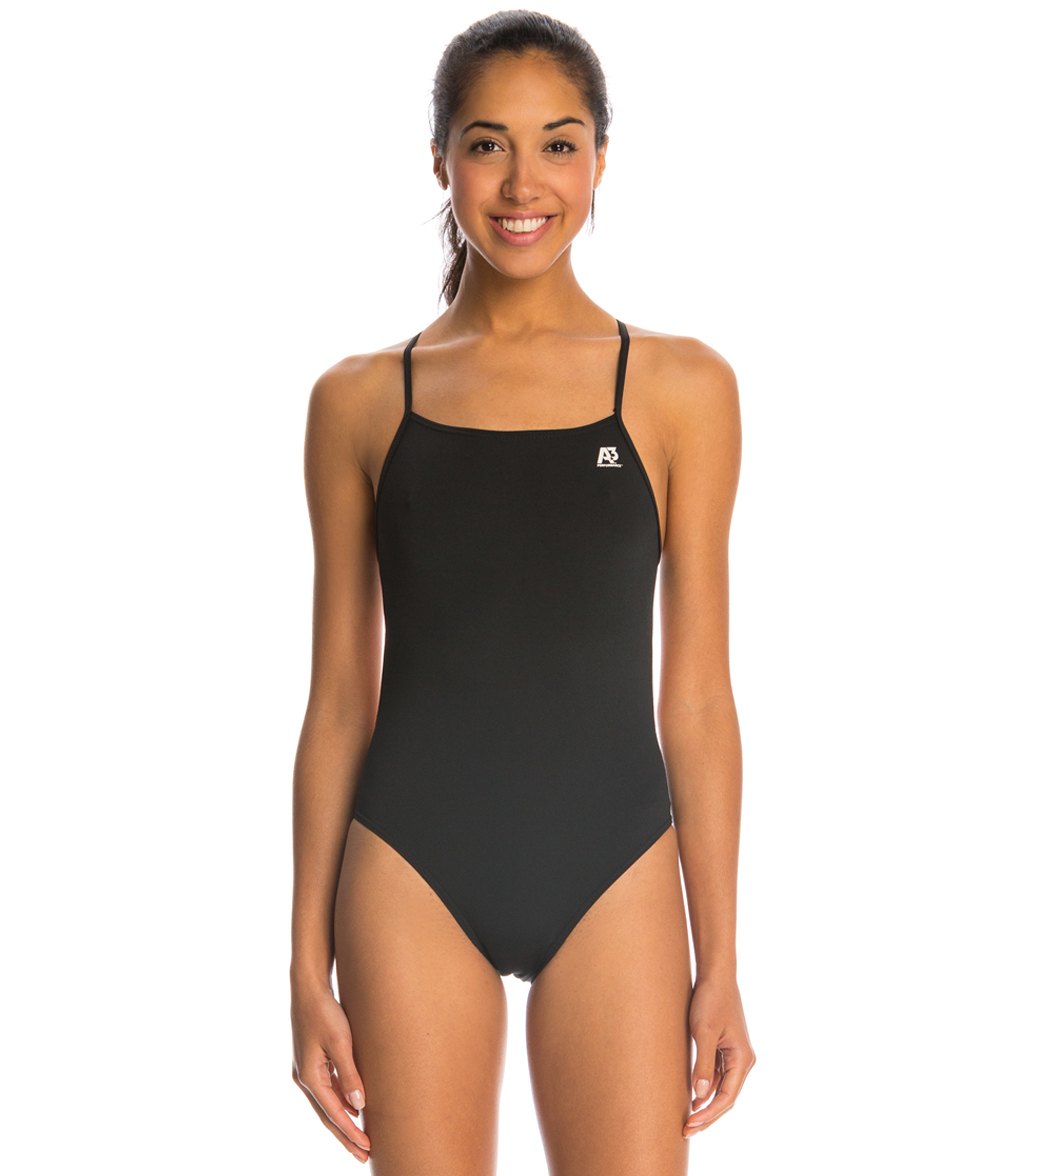 A3 Performance Flash Back One Piece Swimsuit